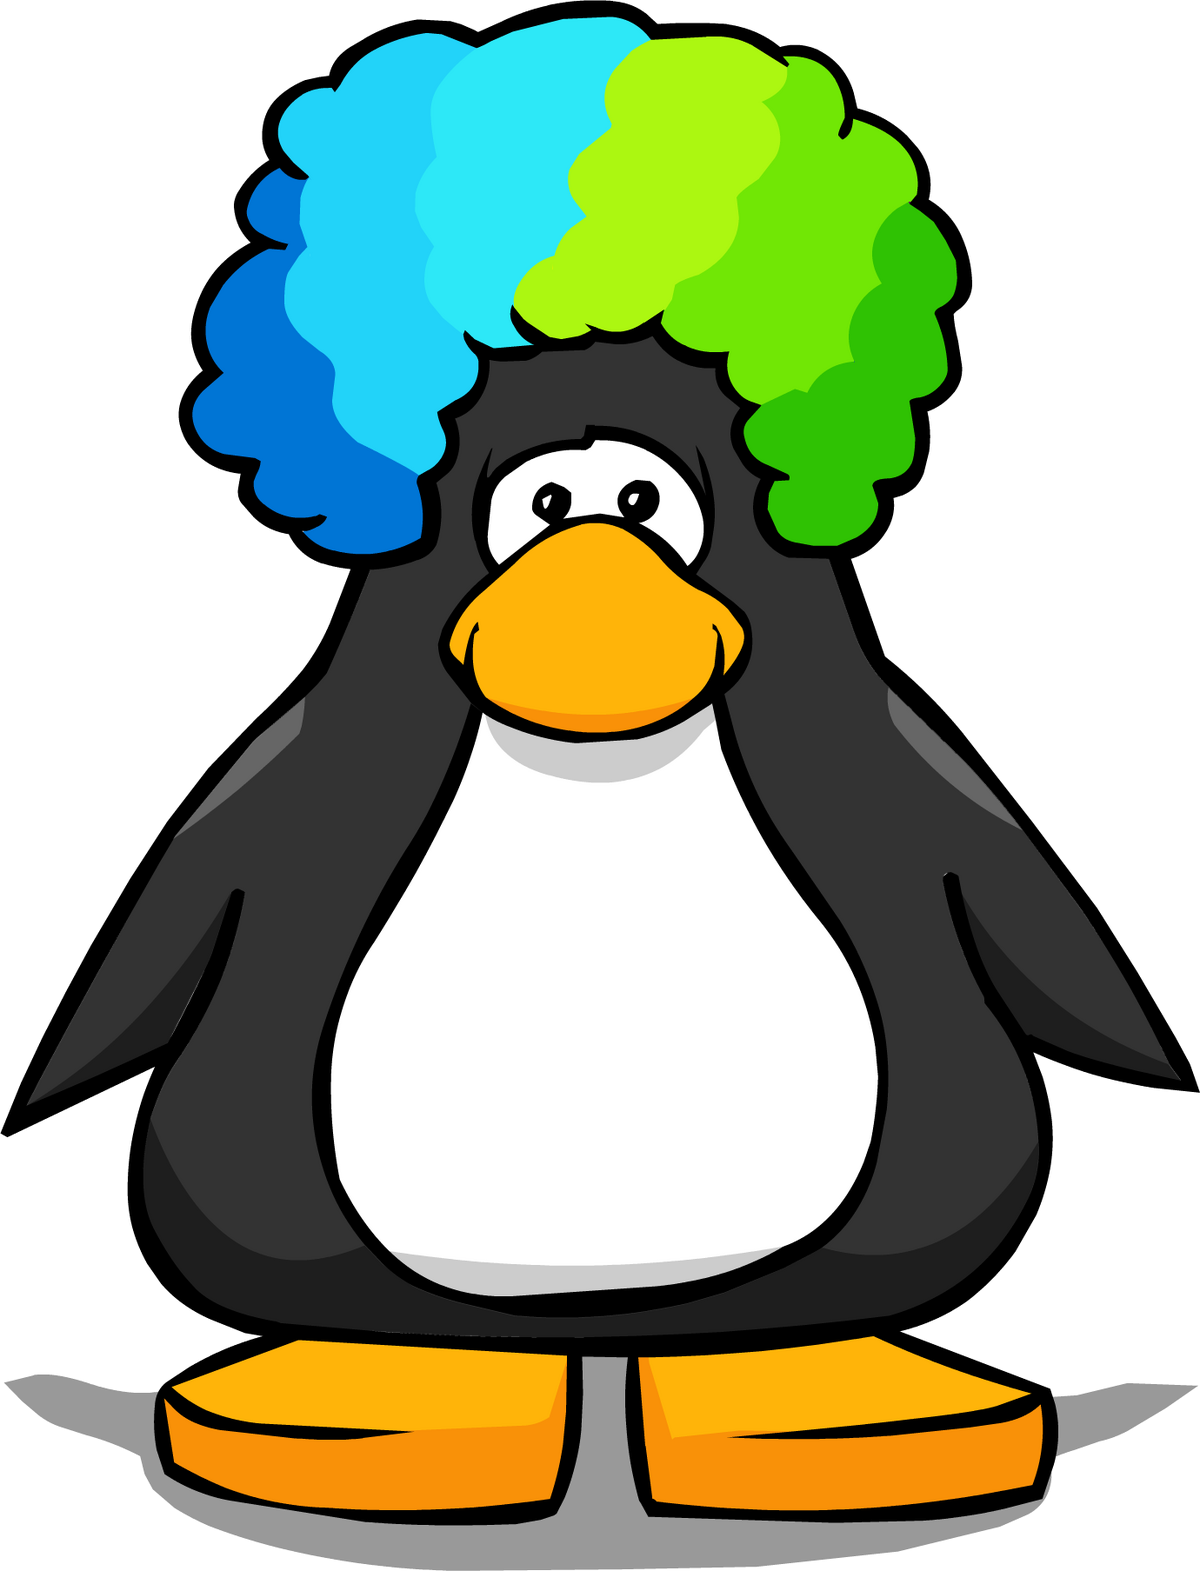 The Fair is Here!  Club Penguin Legacy